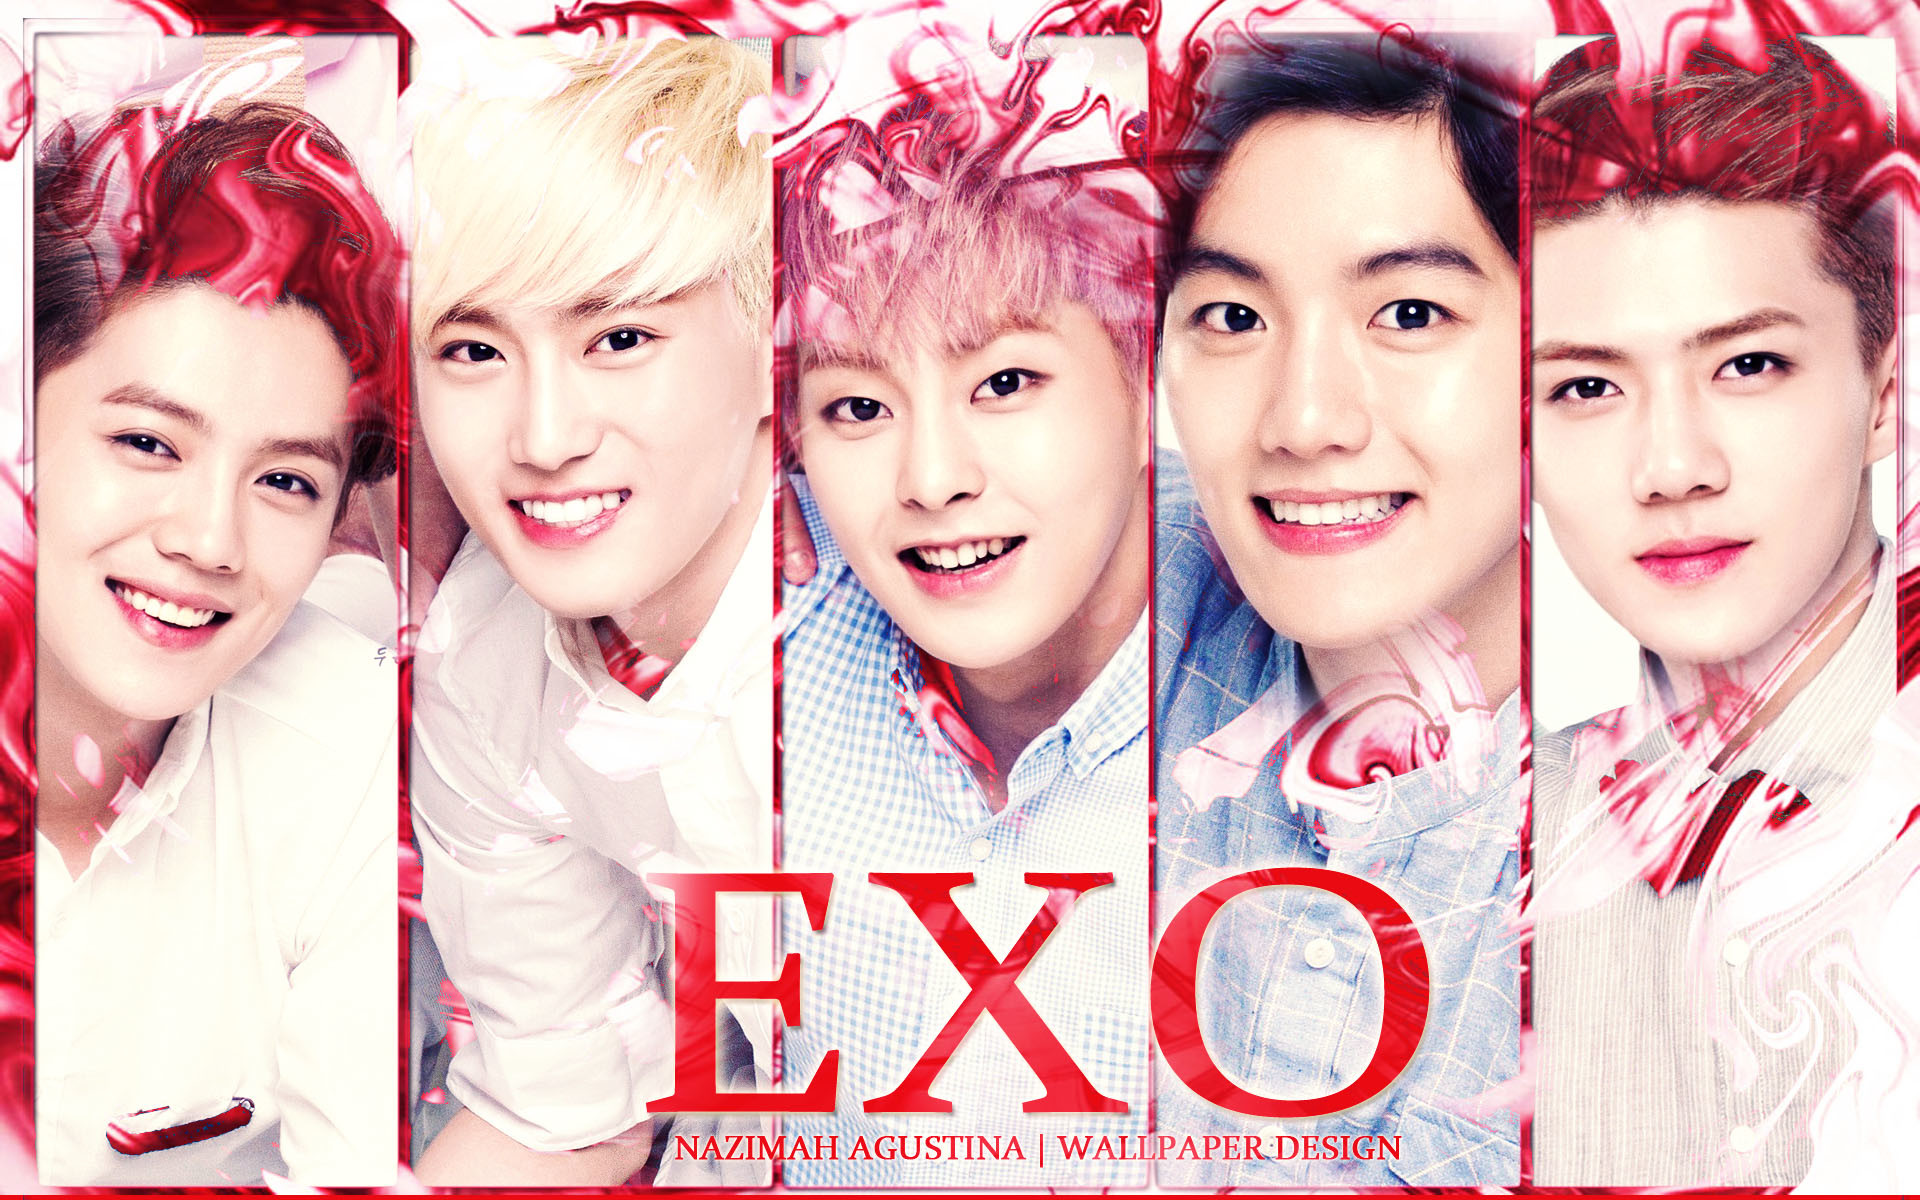 1920x1200 Wallpapers] Happy 3rd Anniversary EXO! | â¥ SMTown Graphic Design